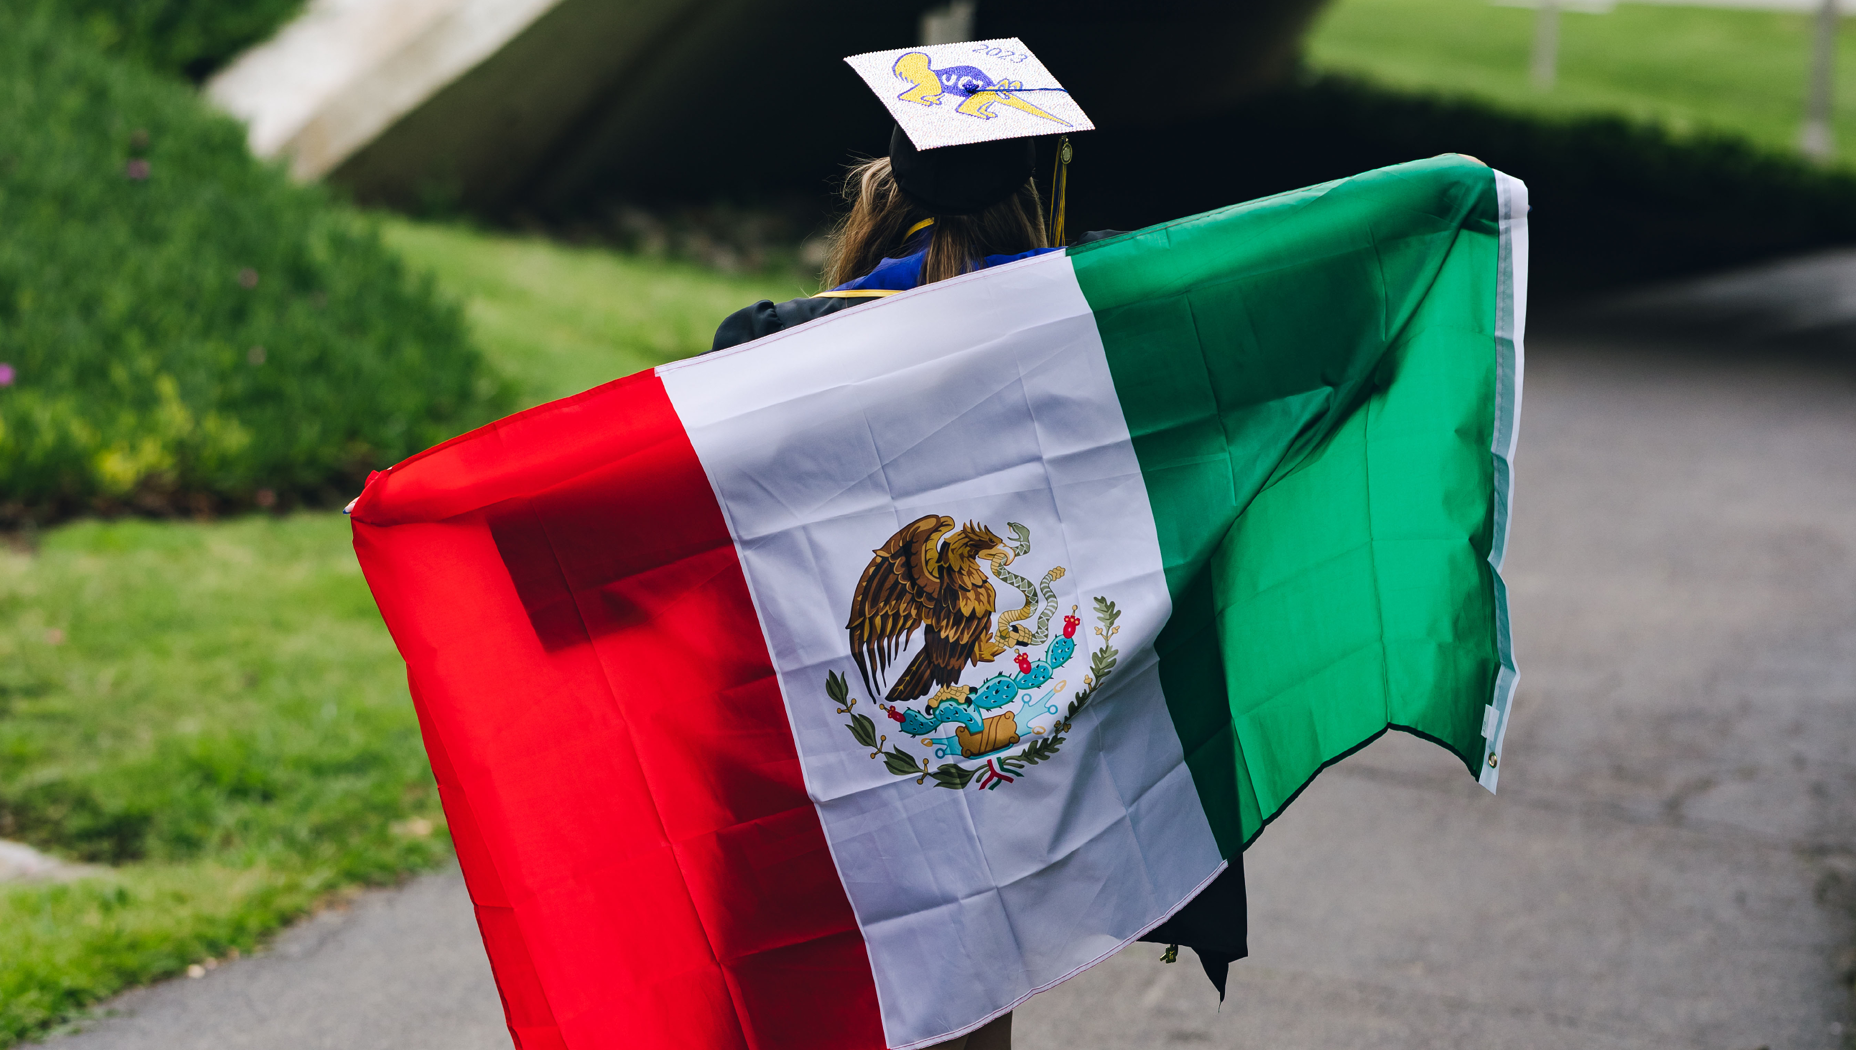 Jessica Ortiz holding a Mexican flag across her back as she walks away from the camera.